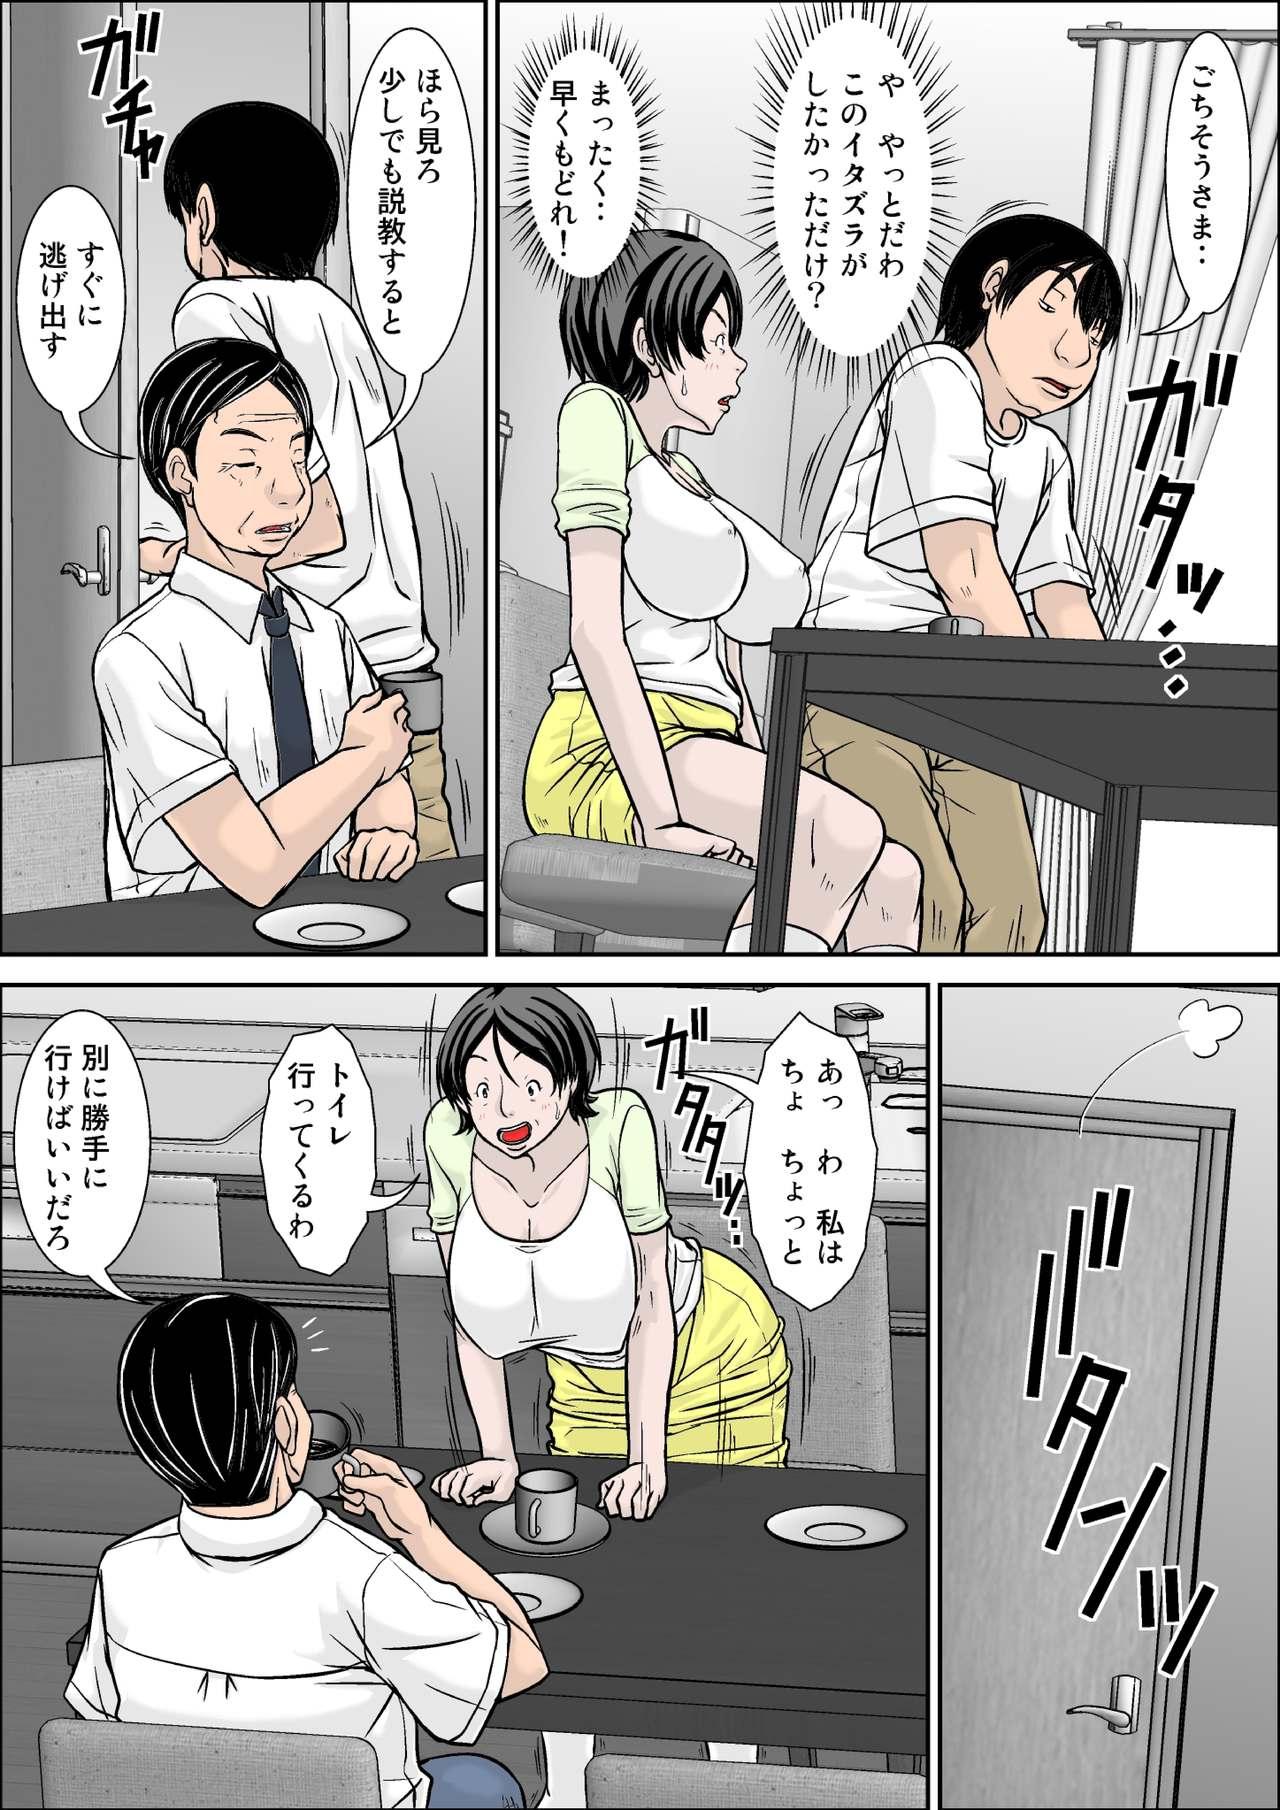 Hey! It is said that I urge you mother and will do what! ... mother Hatsujou - 1st part 15